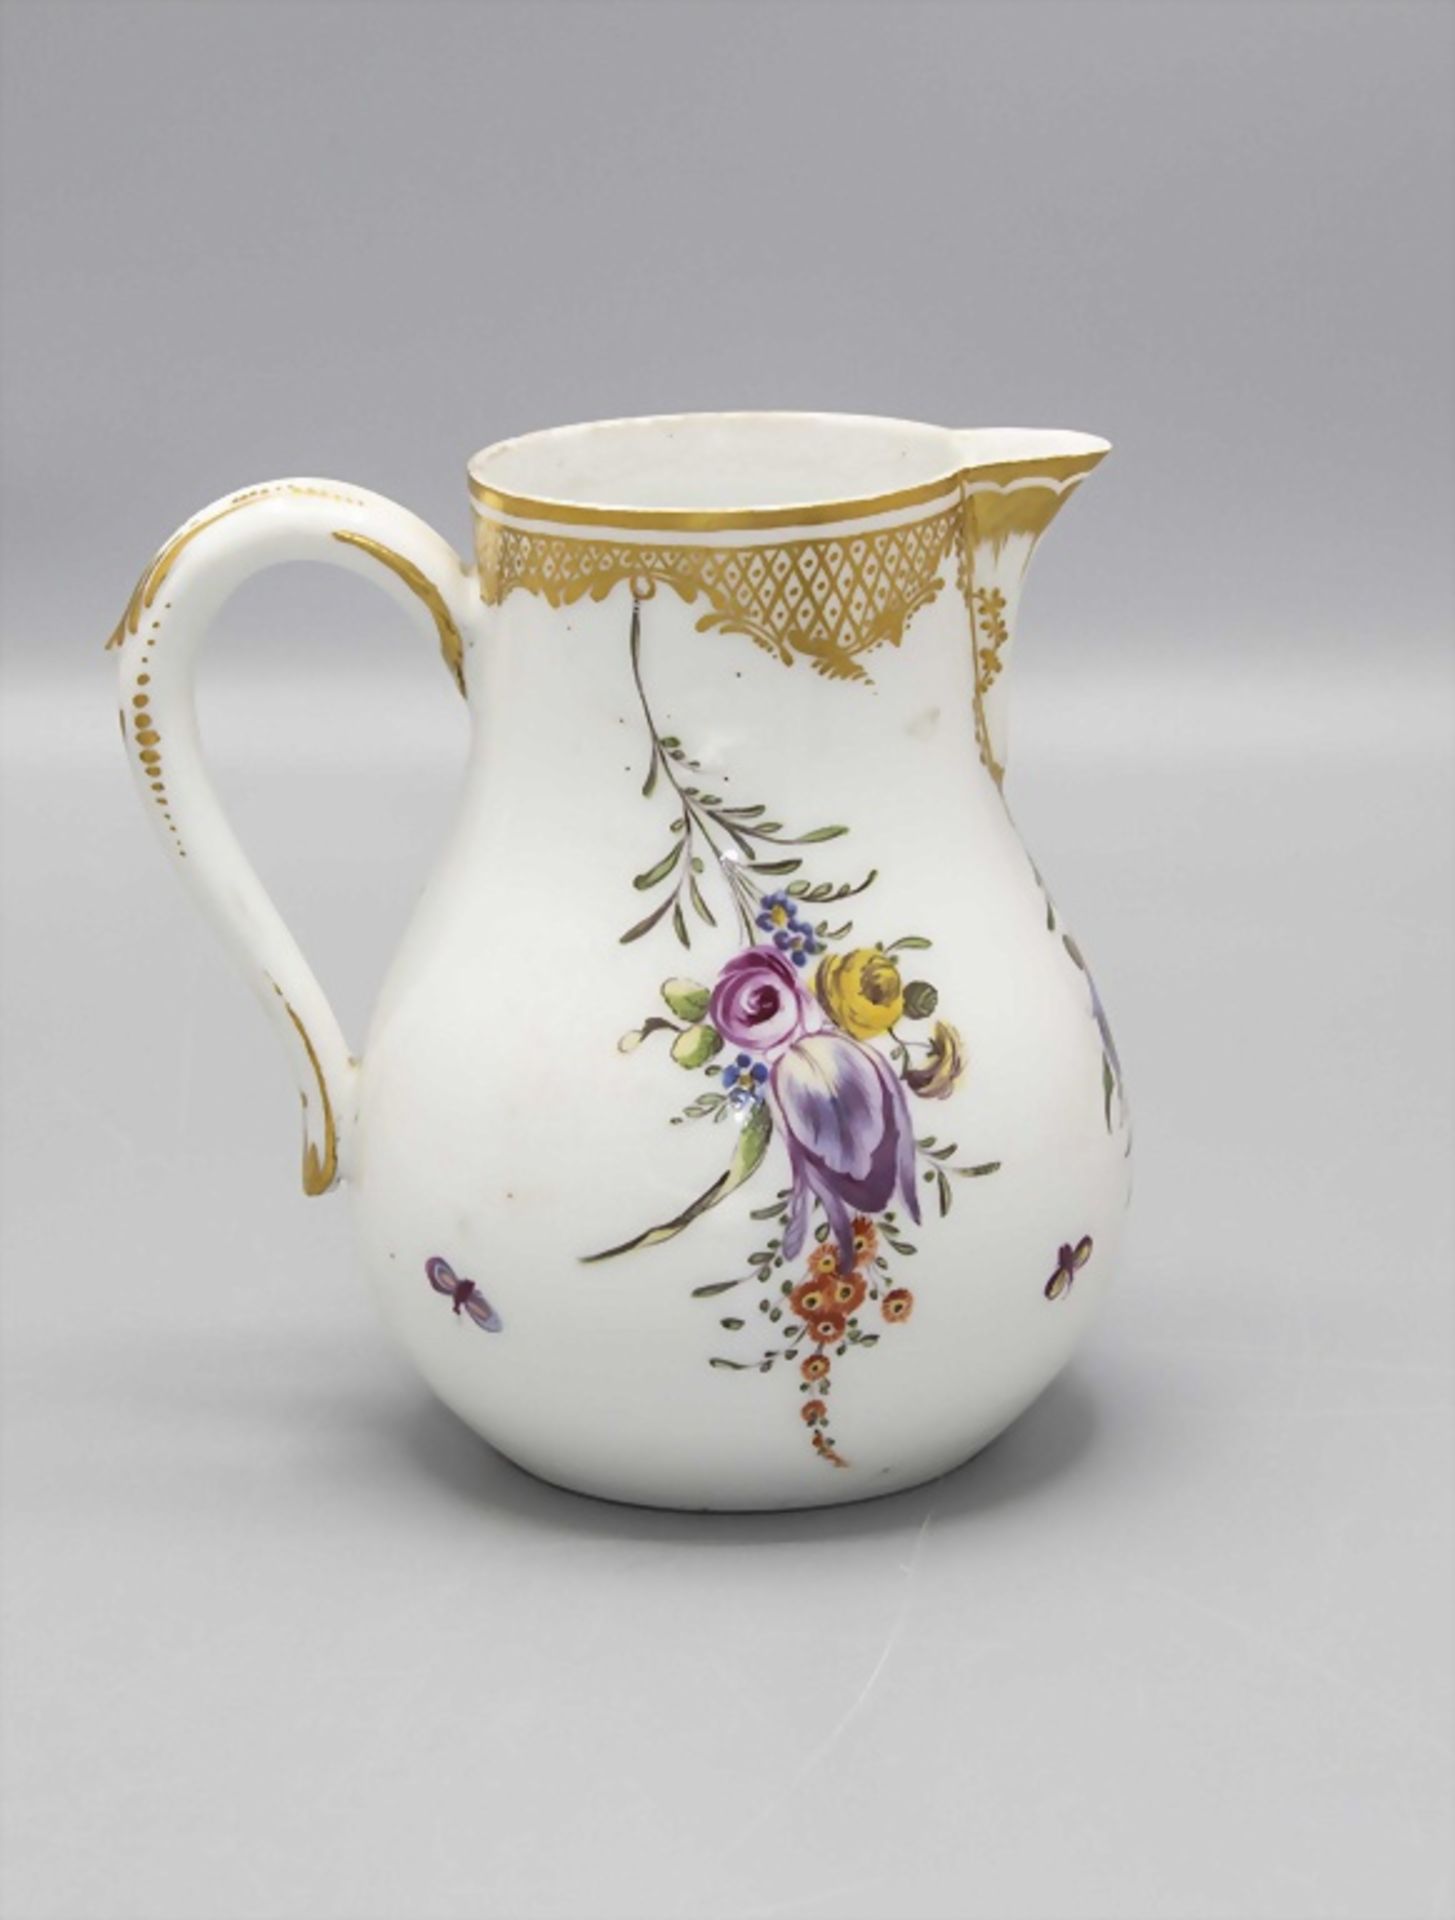 Kanne mit Blumen- u. Insektenmalerei / A pot with flowers and insects, wohl Paris, Mitte 18. Jh. - Image 3 of 6